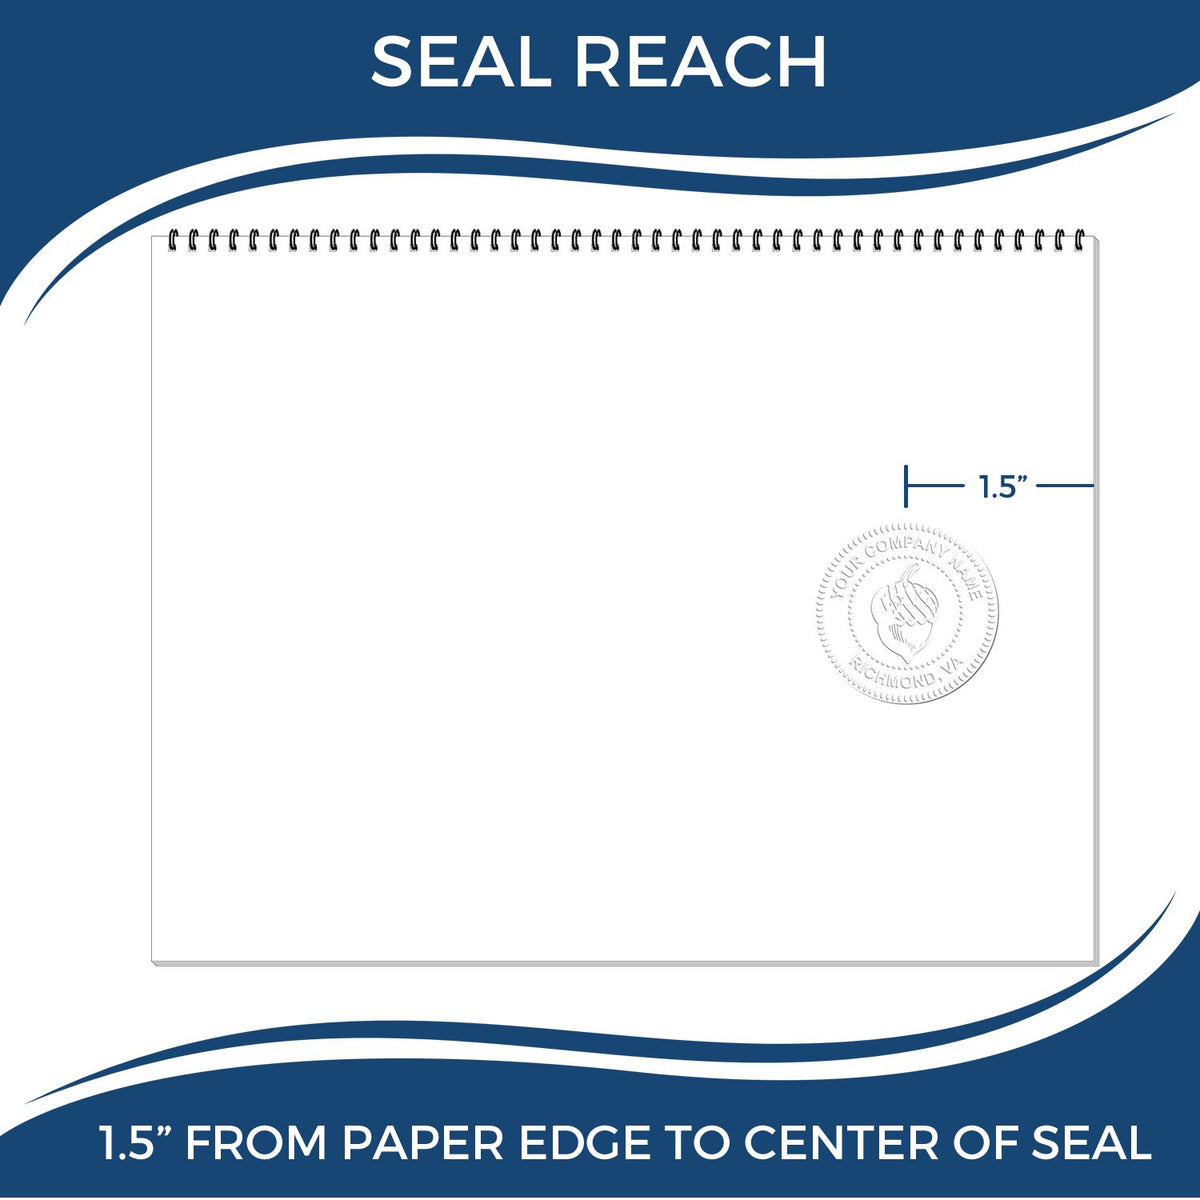 An infographic showing the seal reach which is represented by a ruler and a miniature seal image of the Handheld Georgia Professional Geologist Embosser